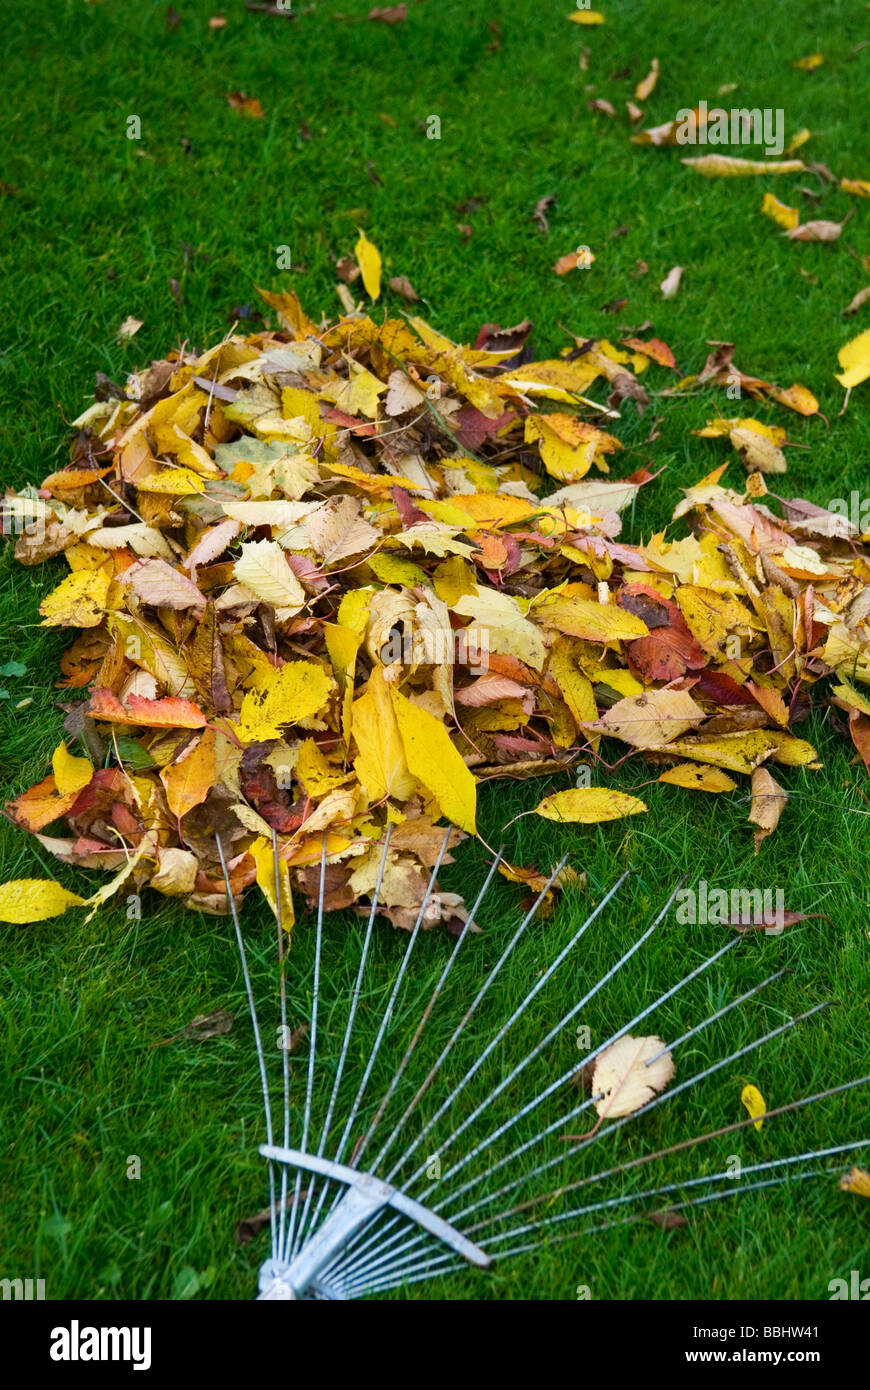 FALLEN LEAVES ON LAWN WITH LAWN RAKE Stock Photo - Alamy